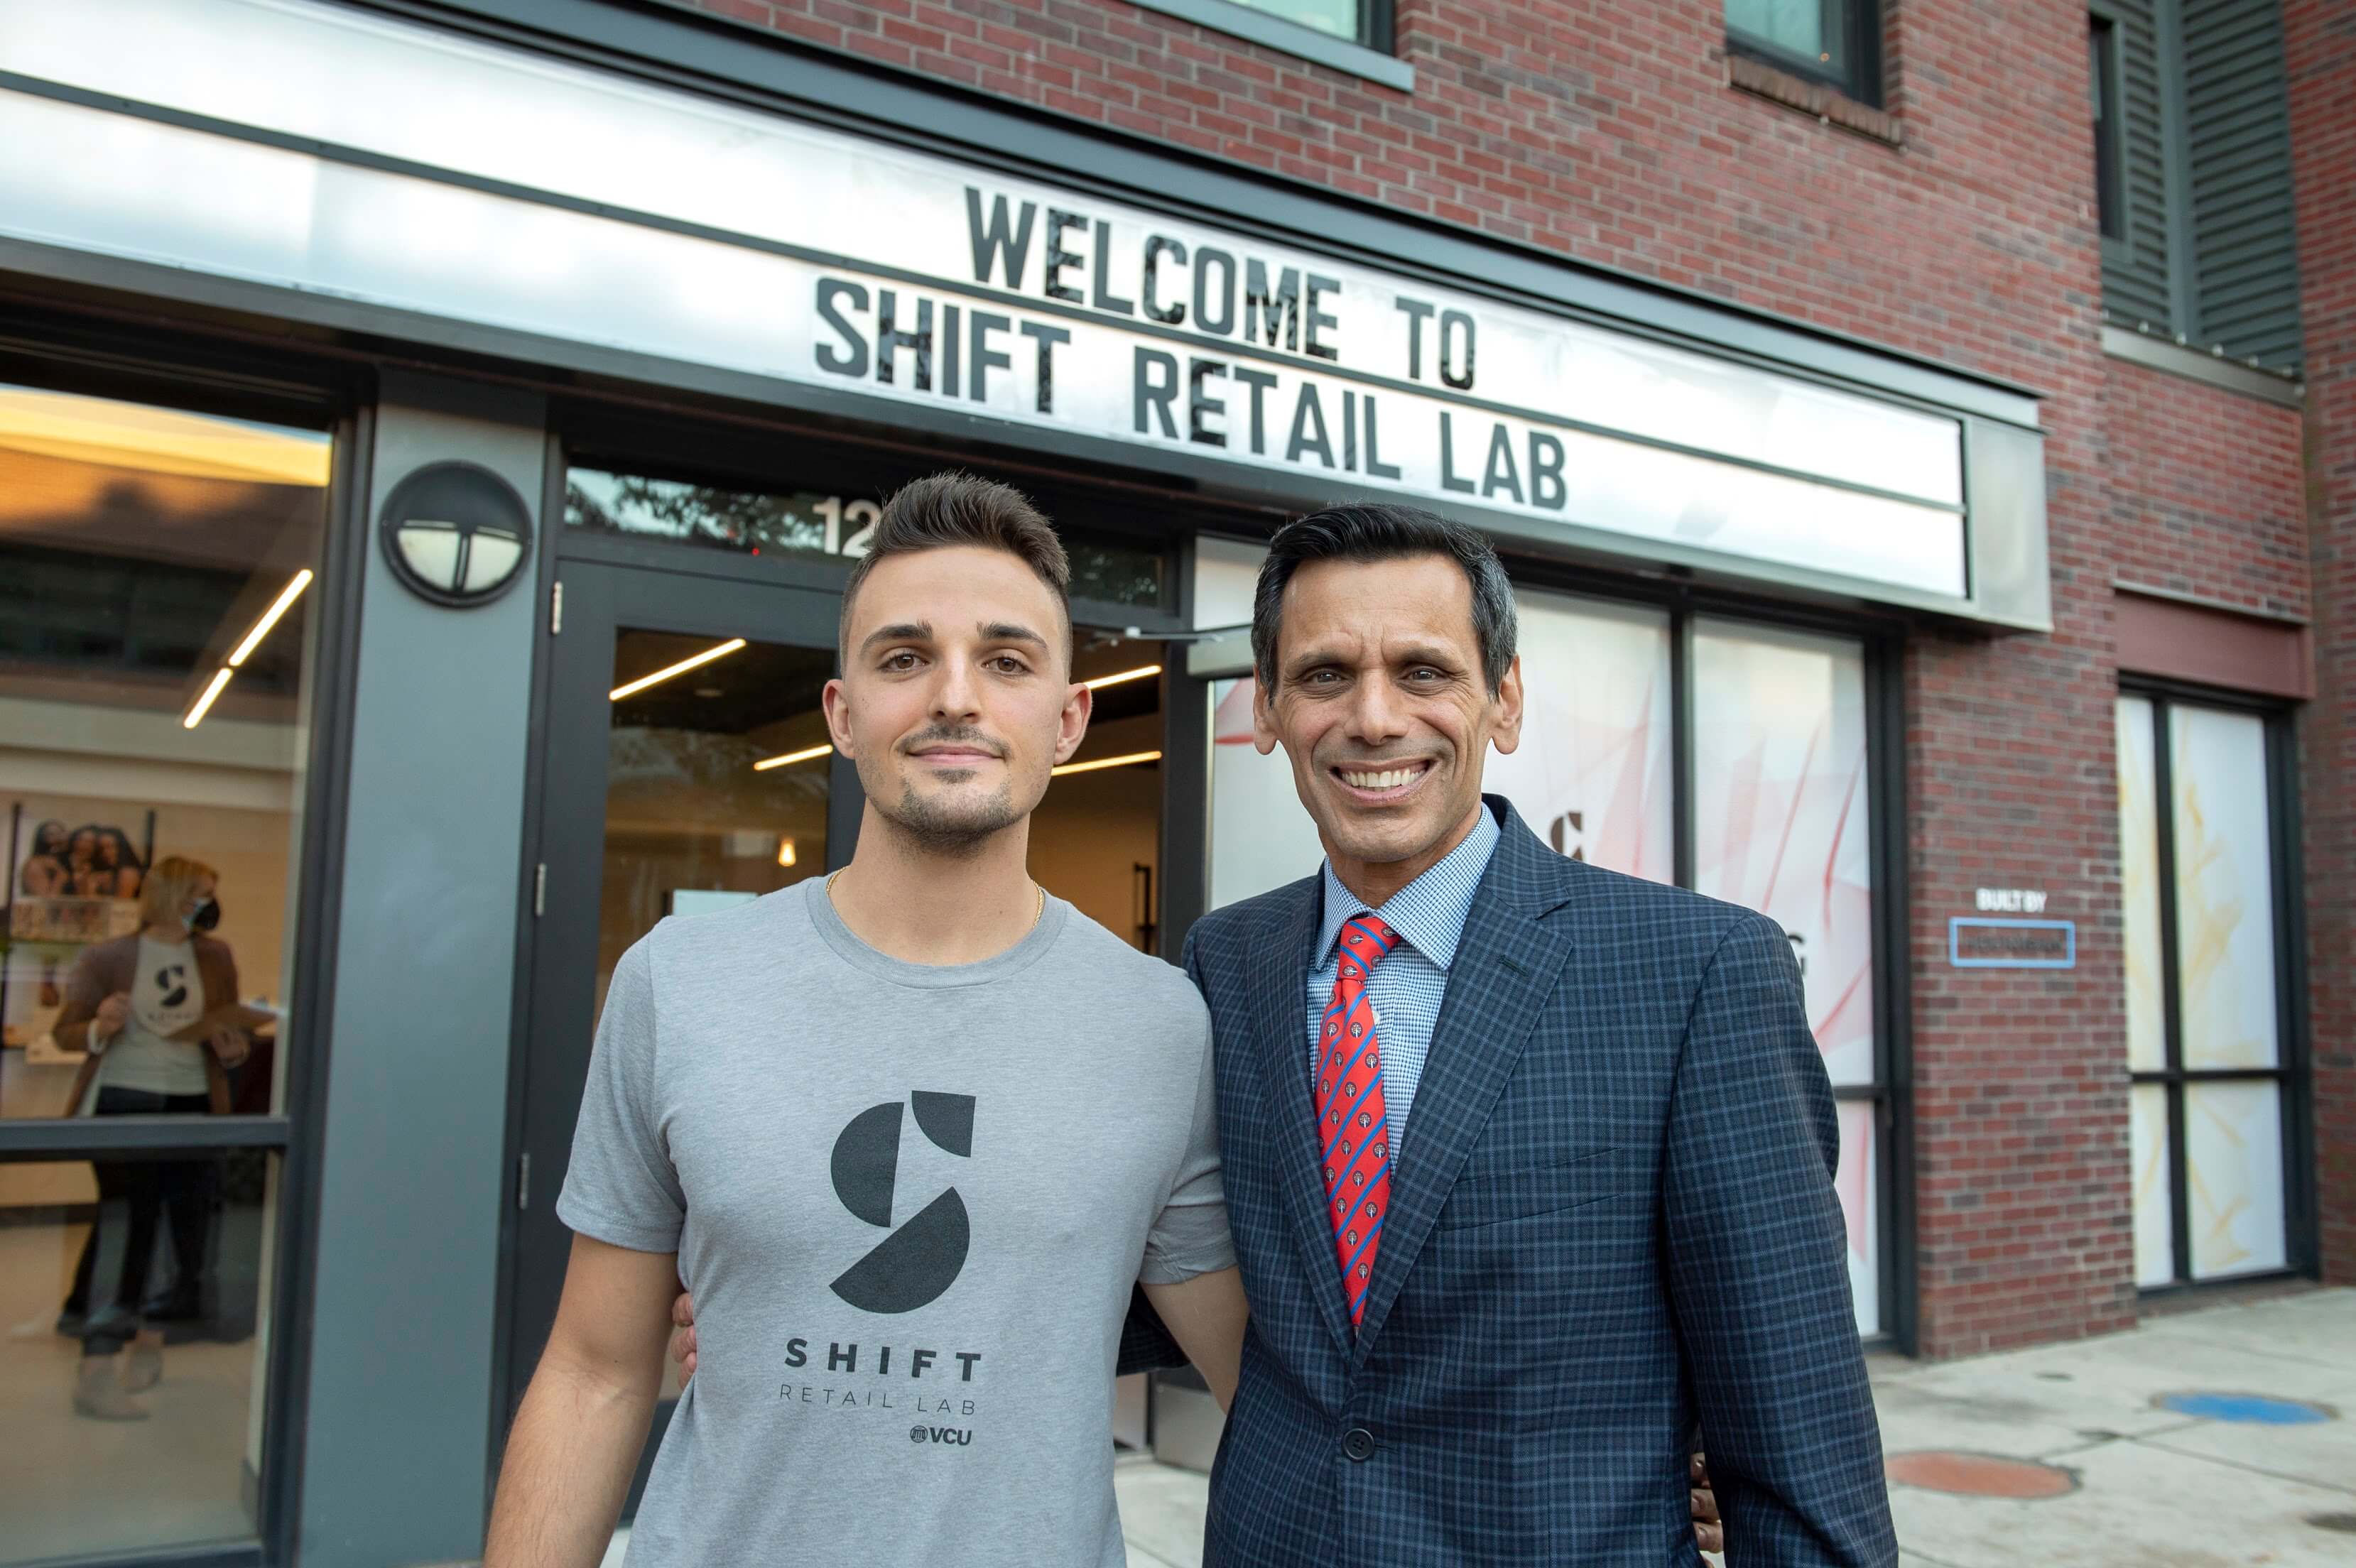 President Rao meeting with an organizer of the shift retail lab